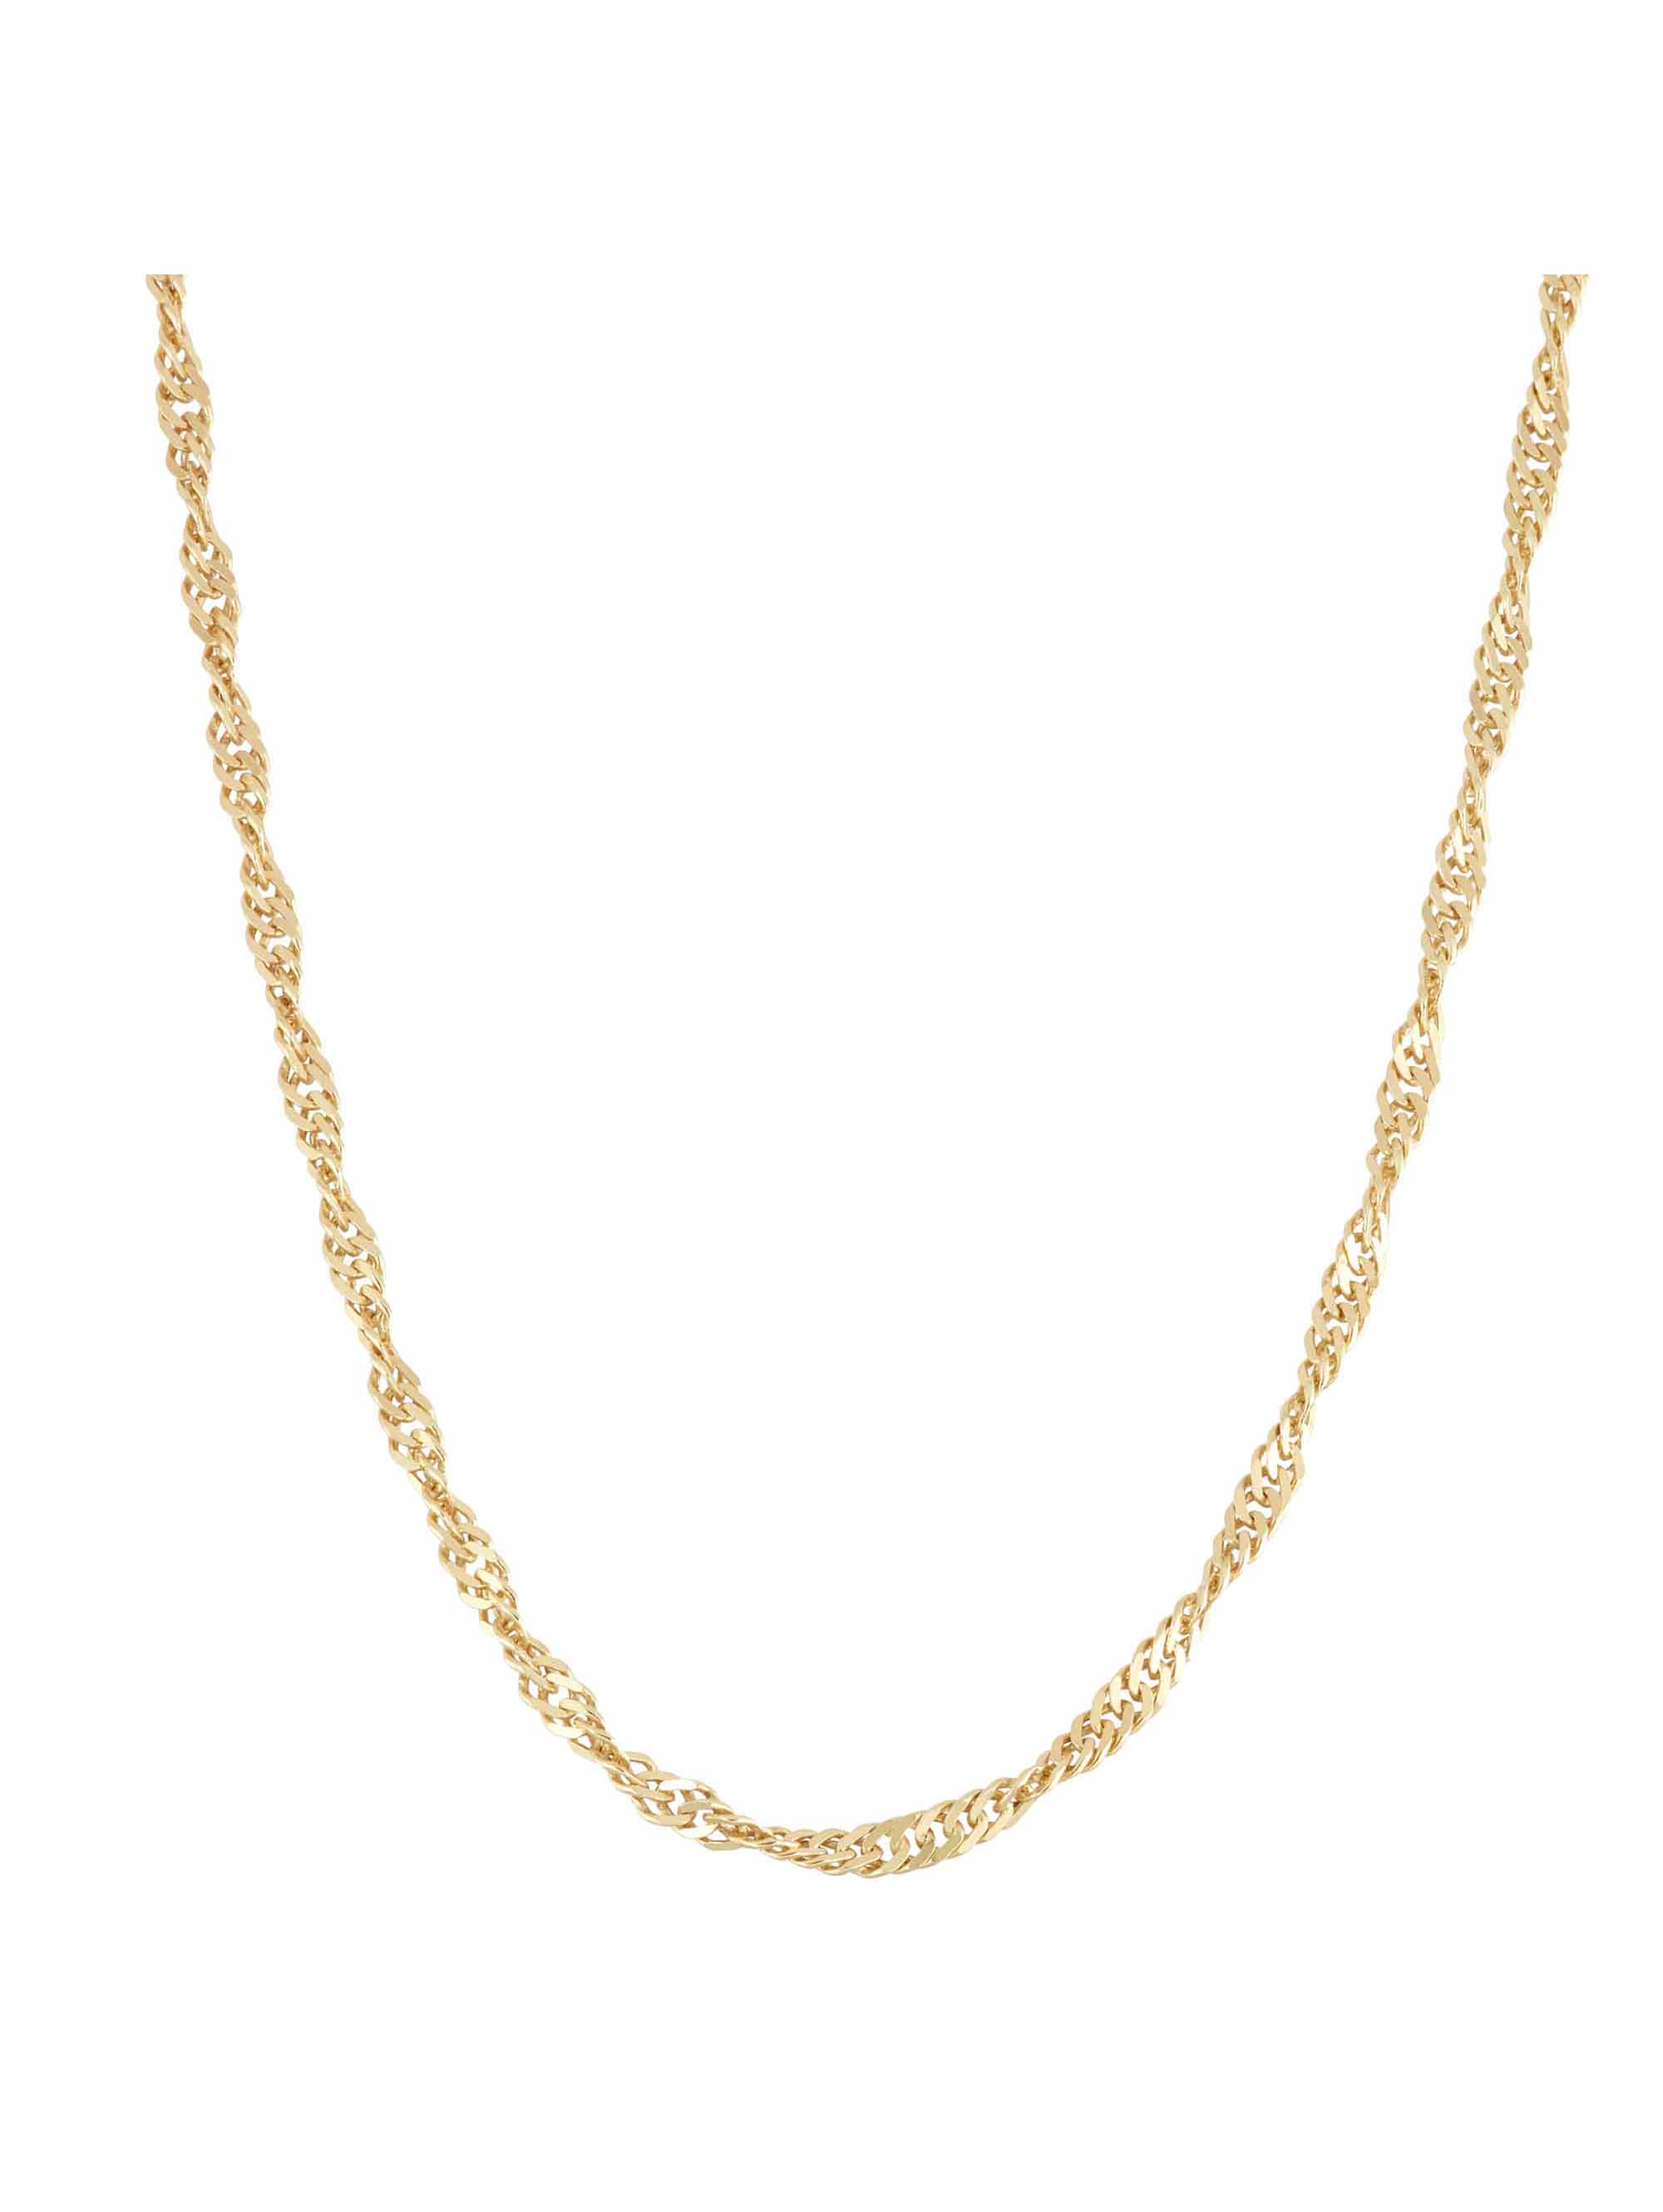 18kt Gold over Sterling Silver Singapore Chain Necklace, 30